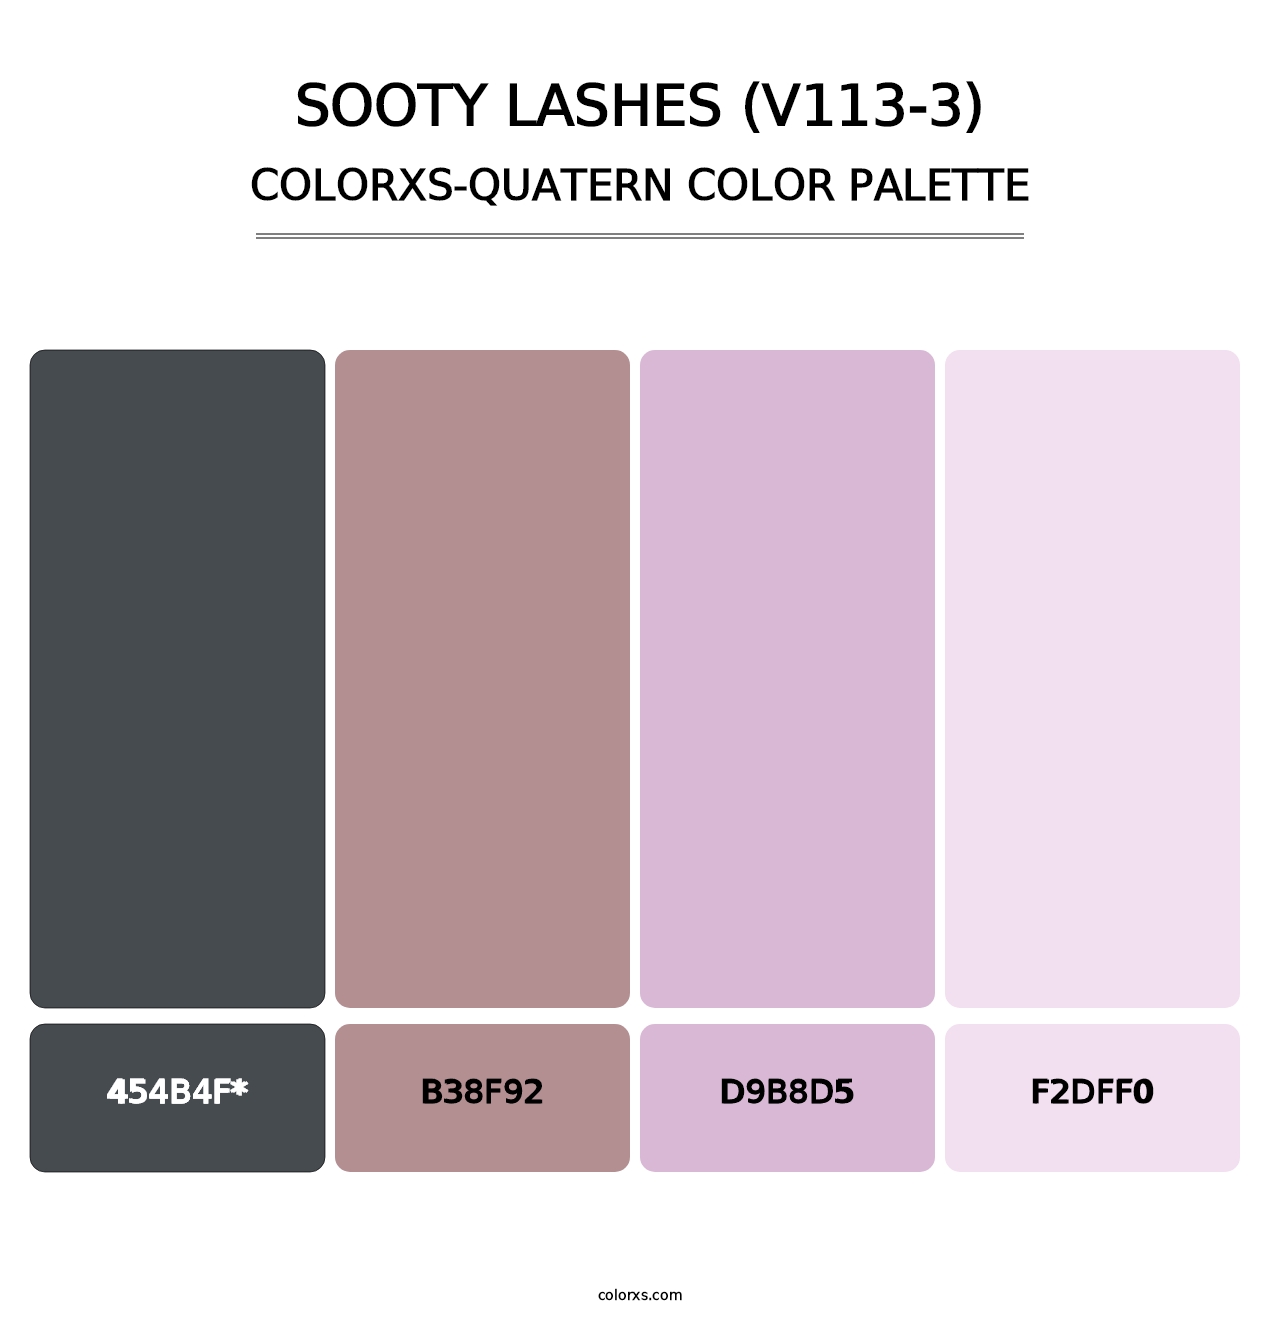 Sooty Lashes (V113-3) - Colorxs Quatern Palette